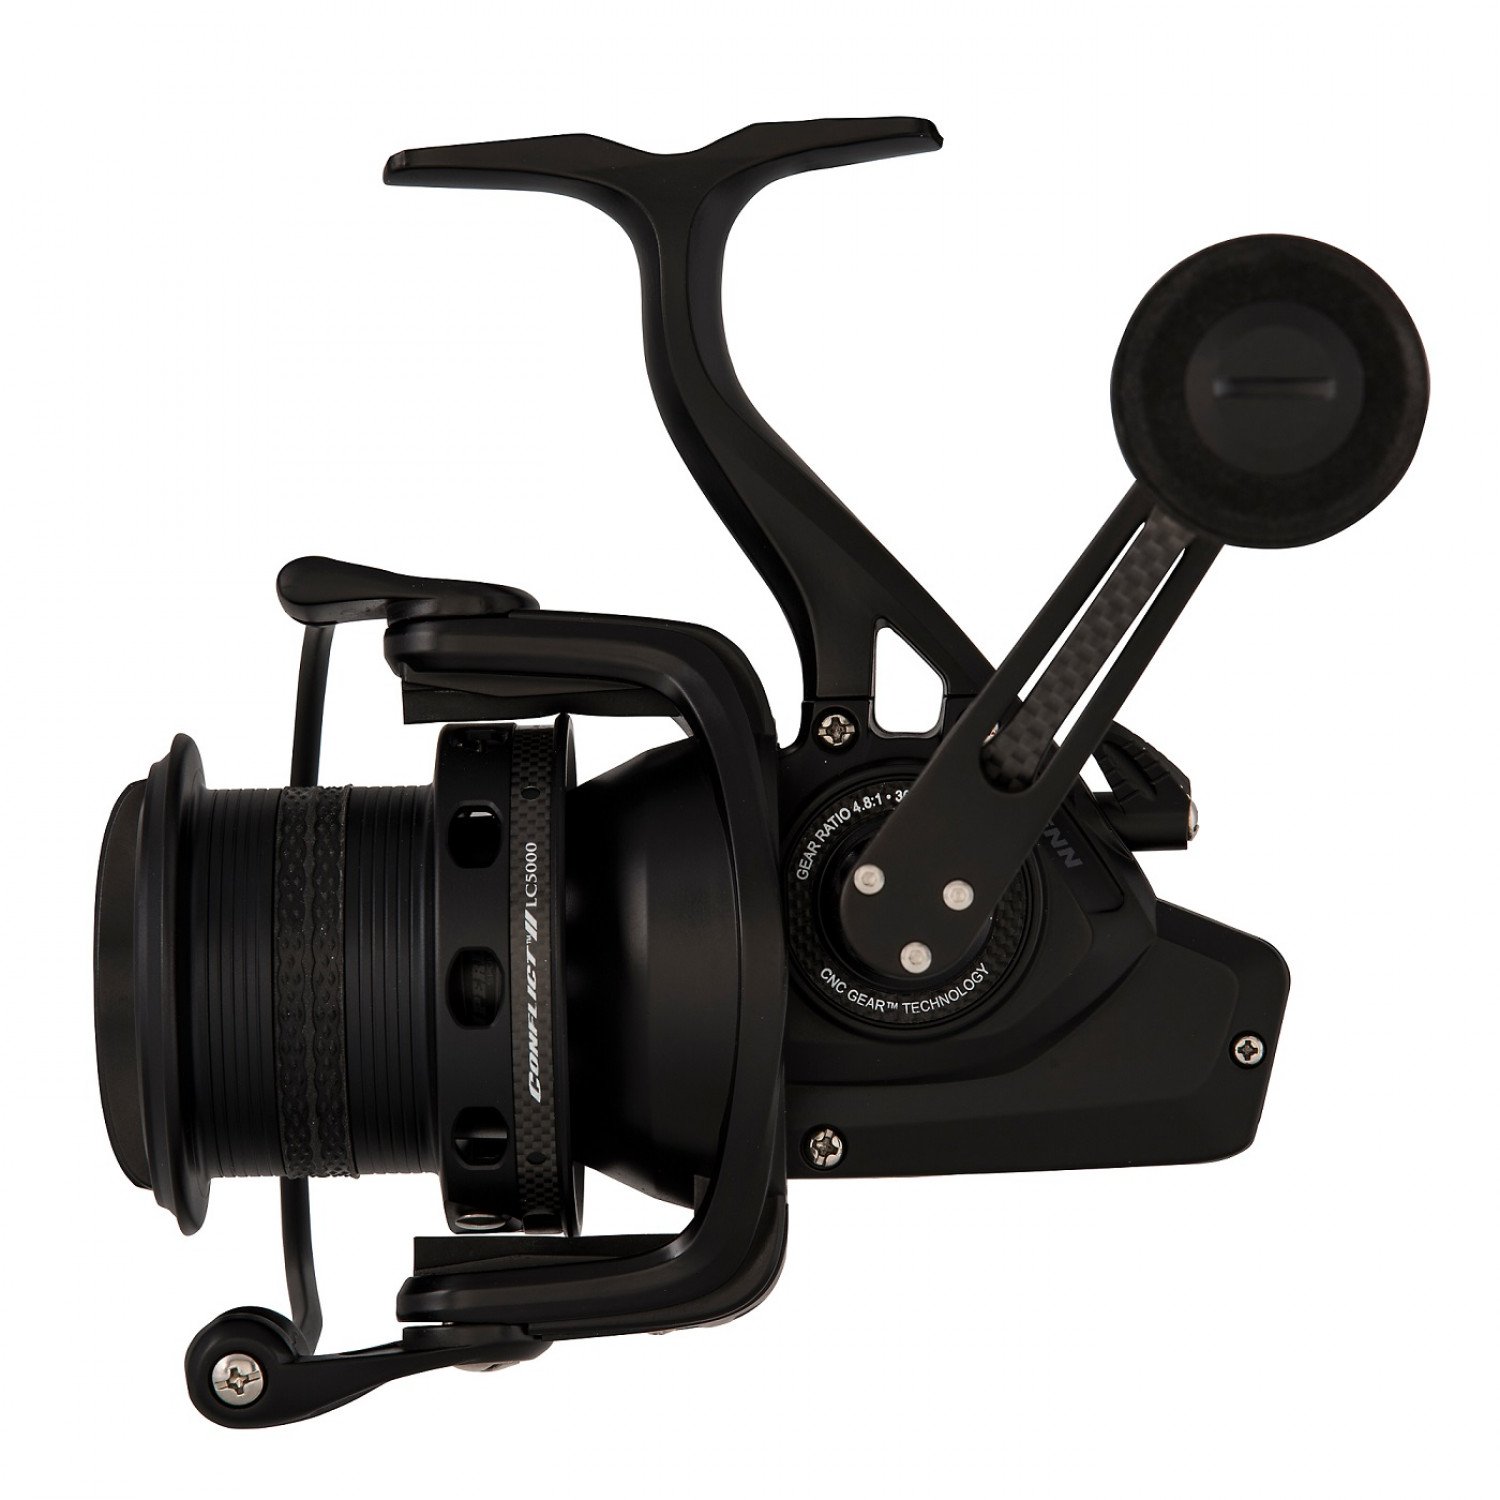 PENN Conflict beidseitig Long cast fishing reel Frontbremse 1481282 00